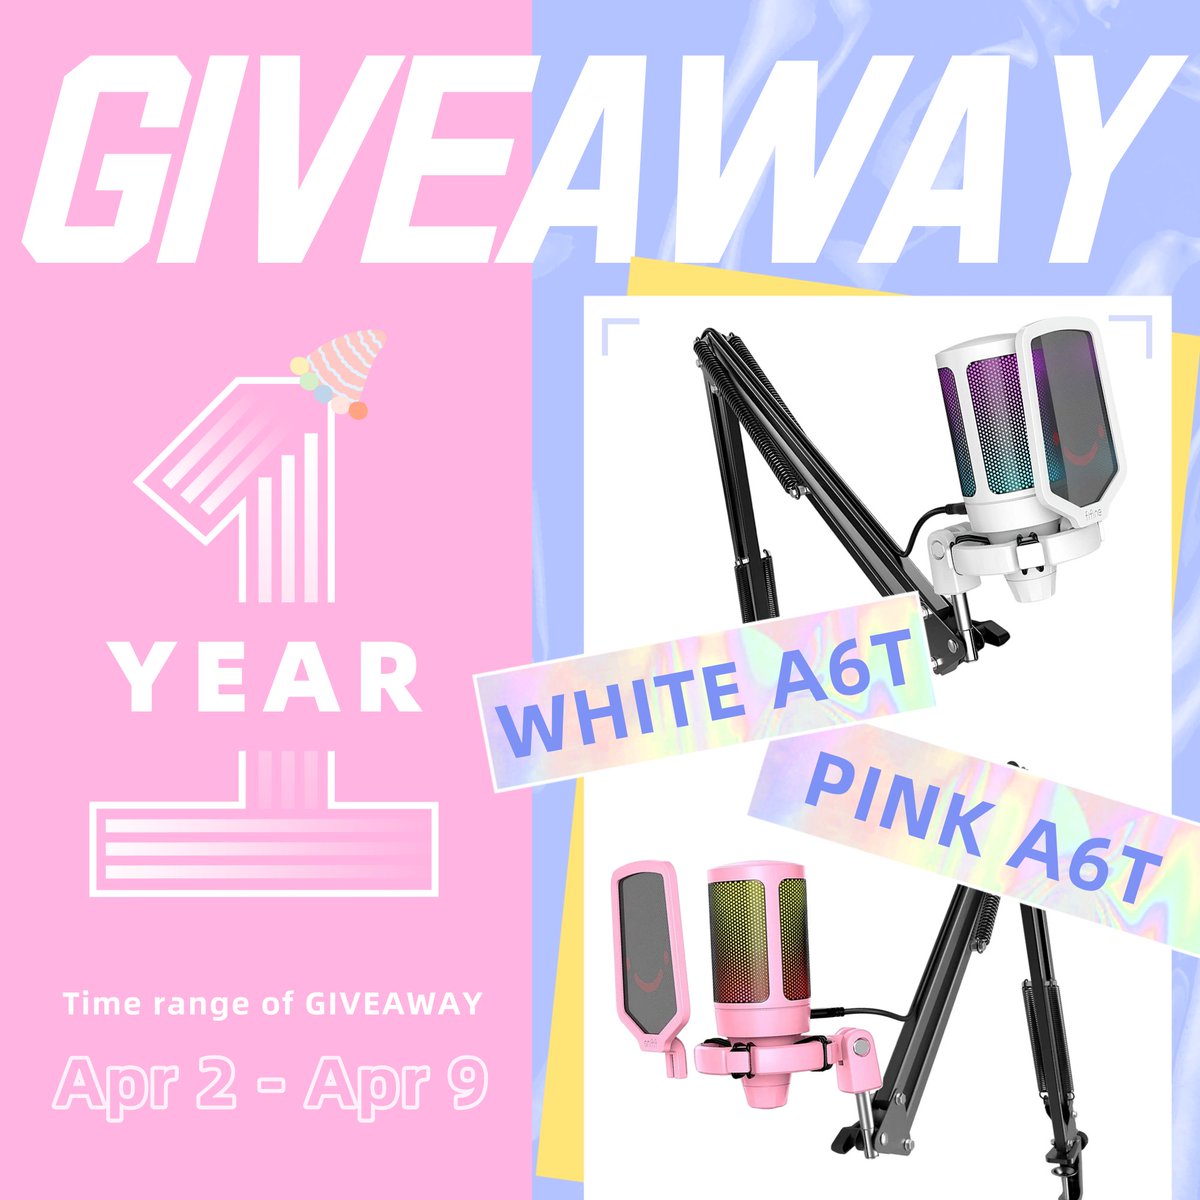 🎂#1YearWithFifineAmpligameA6T

Your massive love supports A6T to turn 1 year old and counting. Win the Global #Giveaway and start our journey!

💌RT & like 
💌Follow us 
💌Comment  🤍 or💗 to let us know which color ver. you like and show us the setup you're going to join A6T in